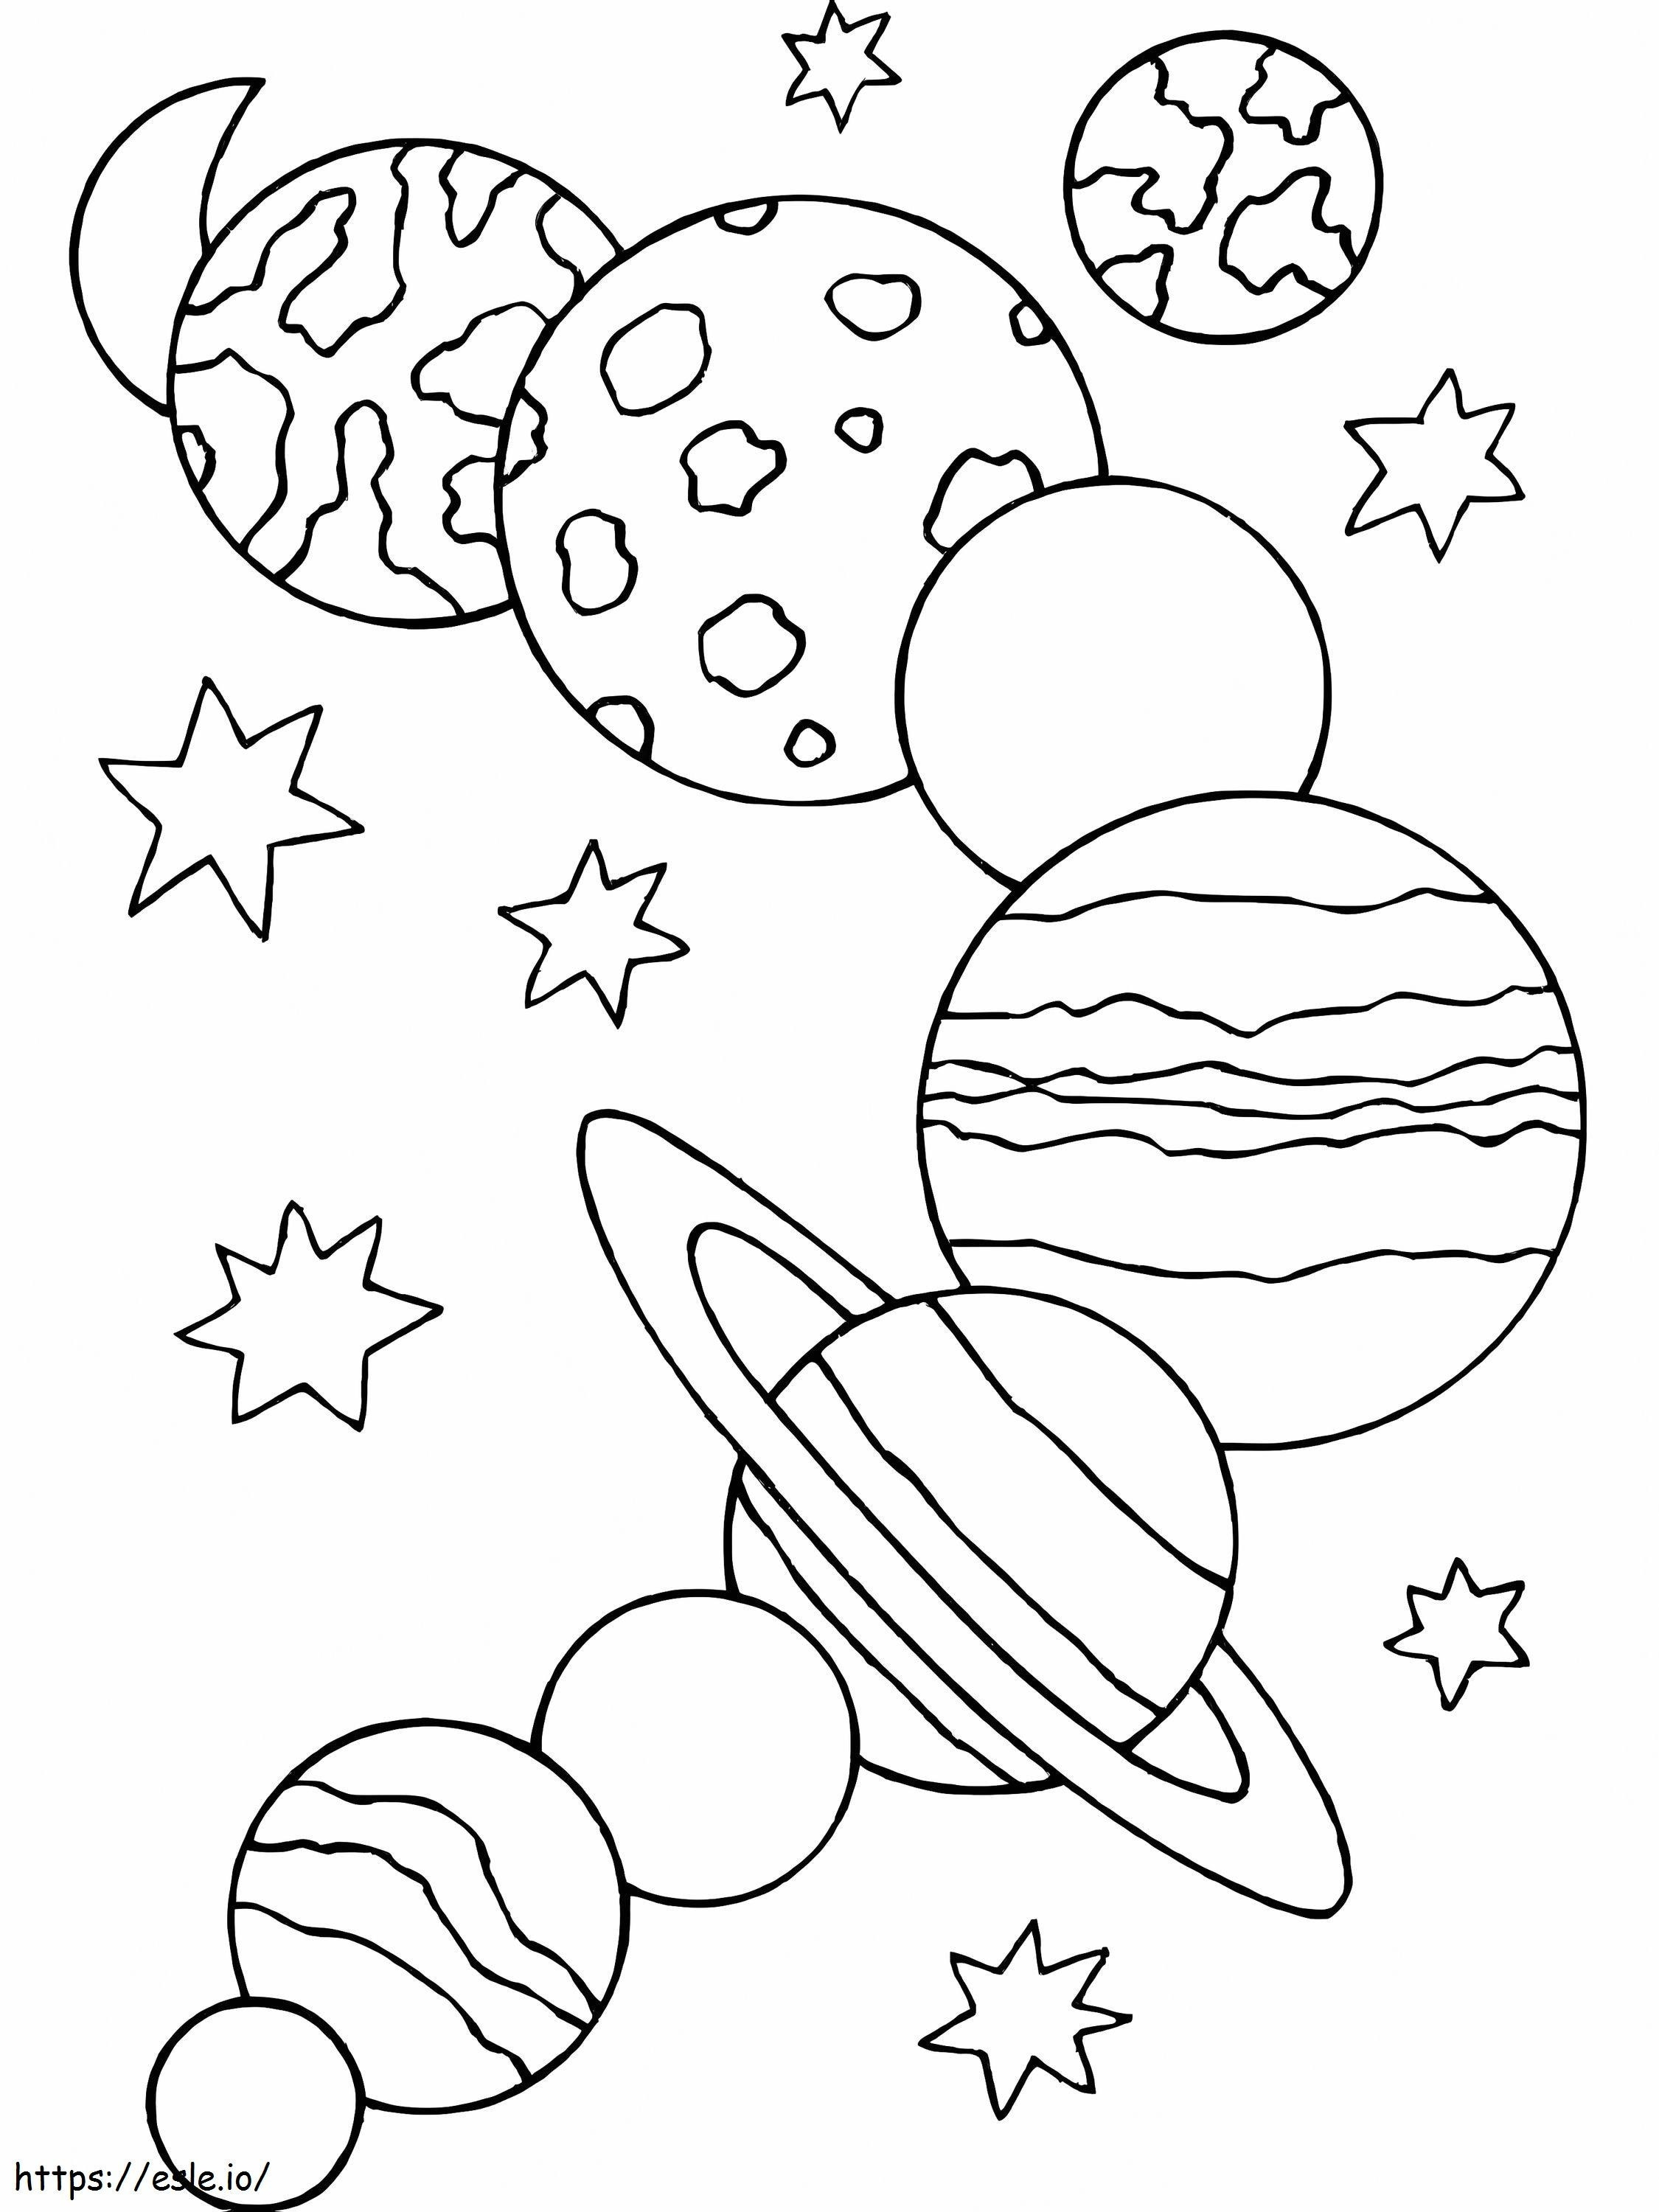 Space coloring page